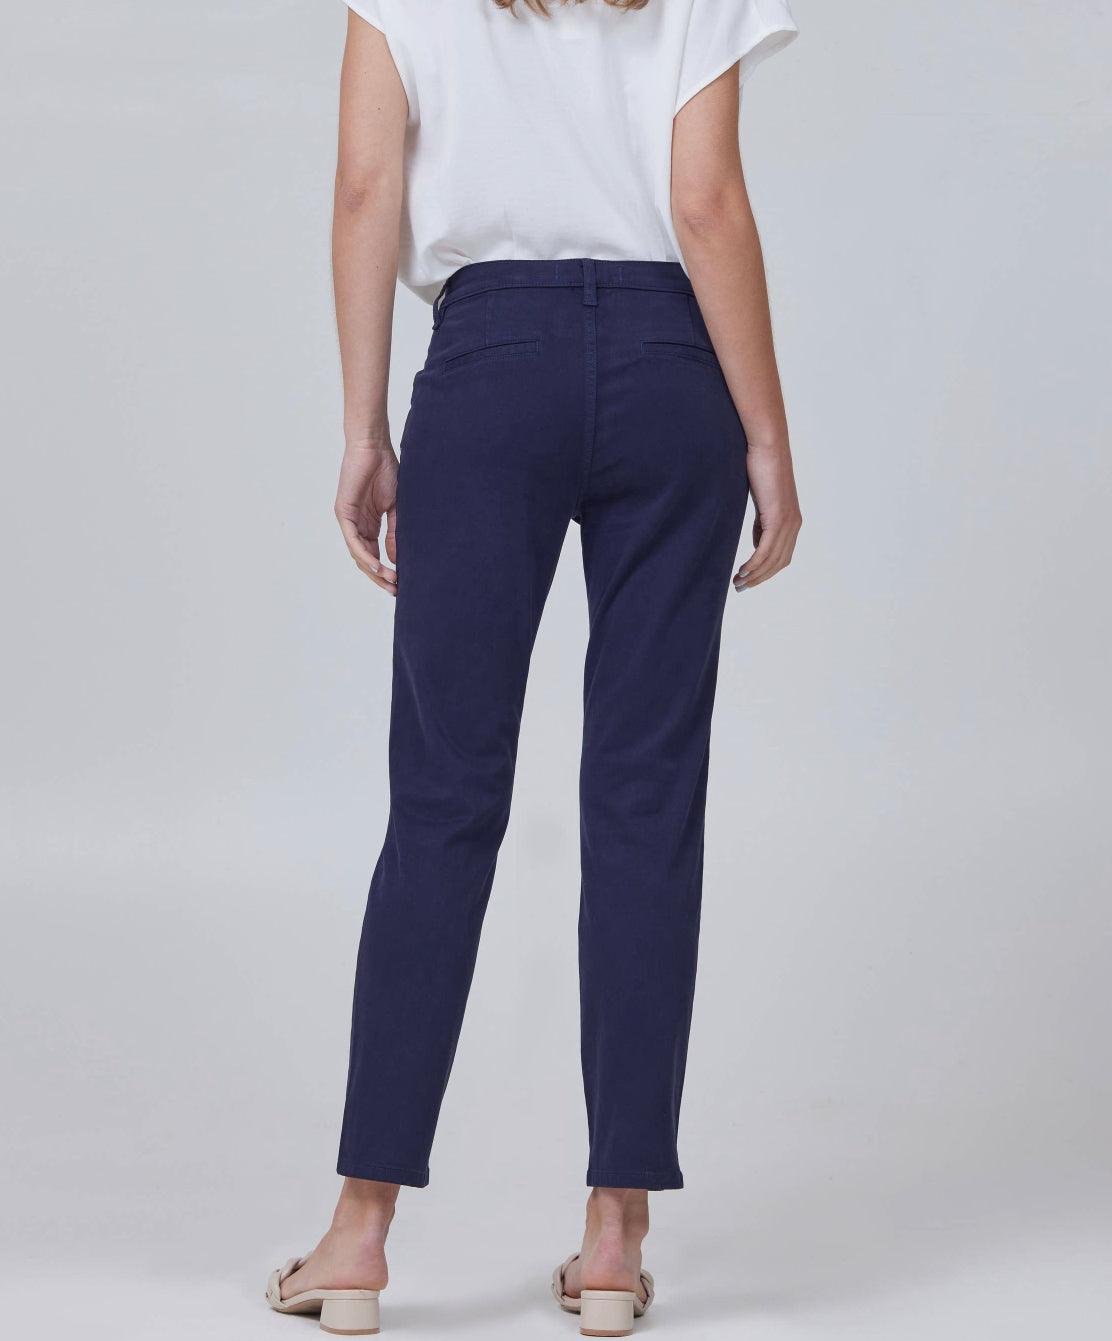 The Pert Tapered Trousers with Ruffle Pocket Accents | Fruit of the Vine Boutique 